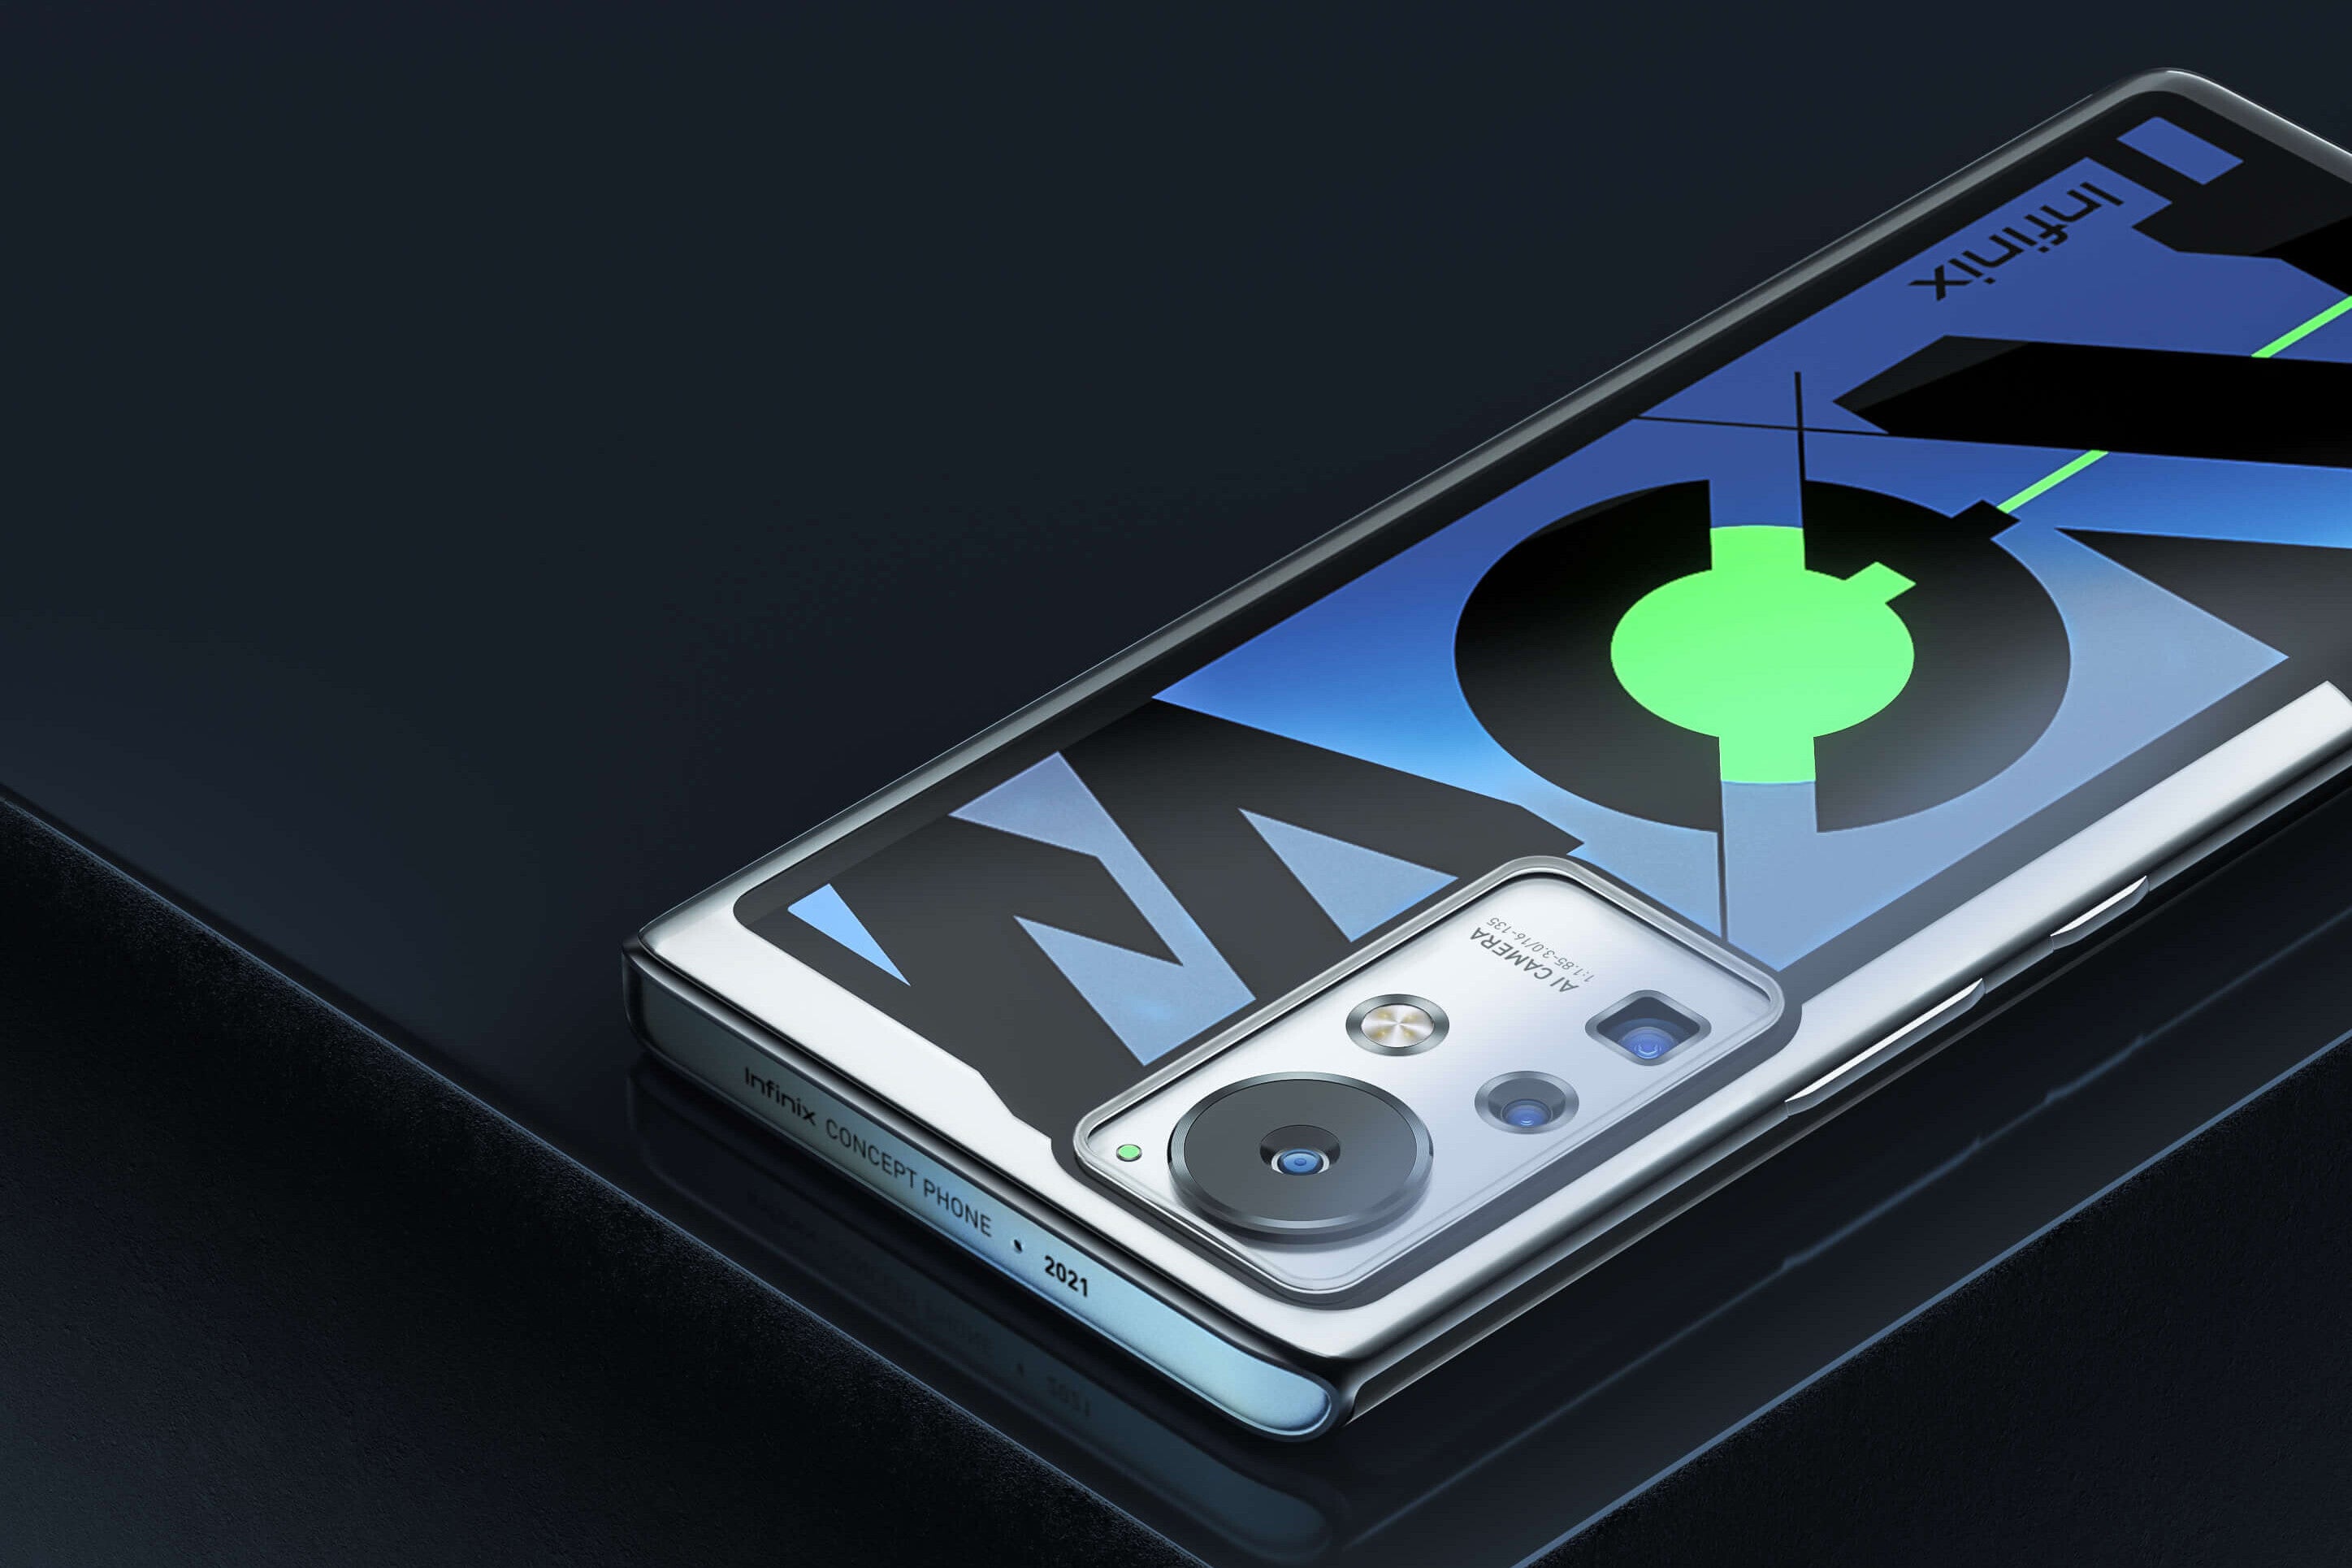 This crazy concept phone changes colors and fully charges in 10 minutes